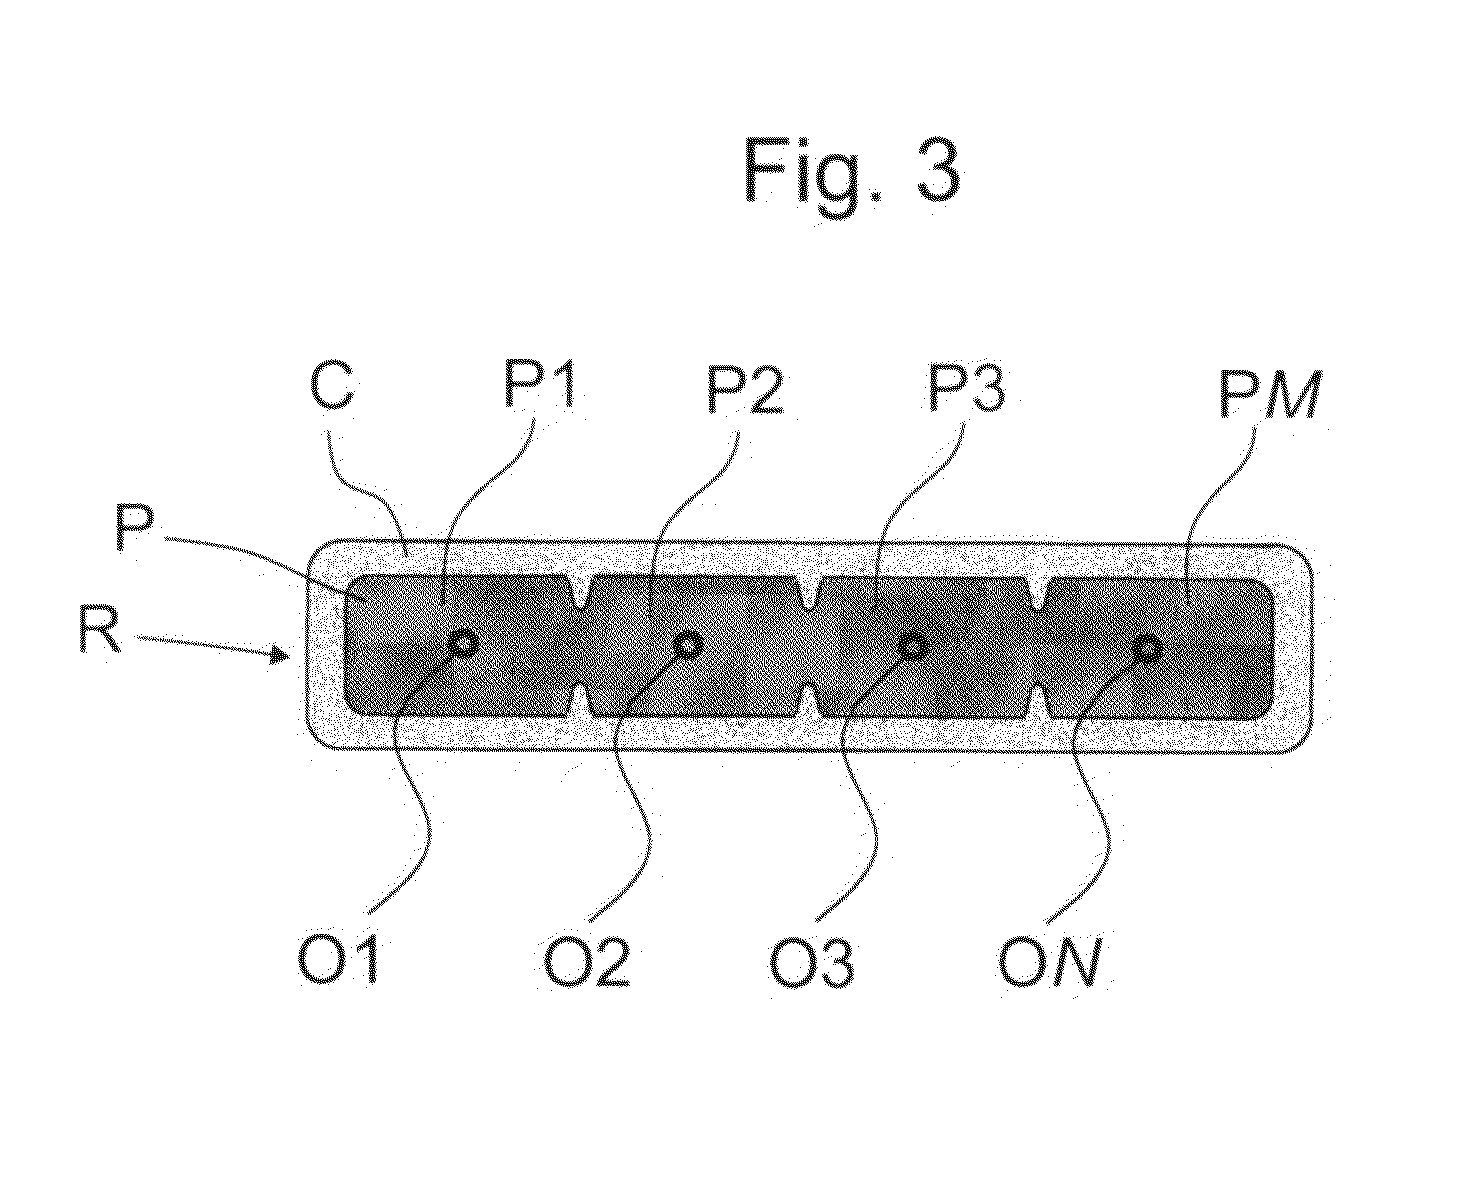 Rope of an elevator and a method for manufacturing the rope